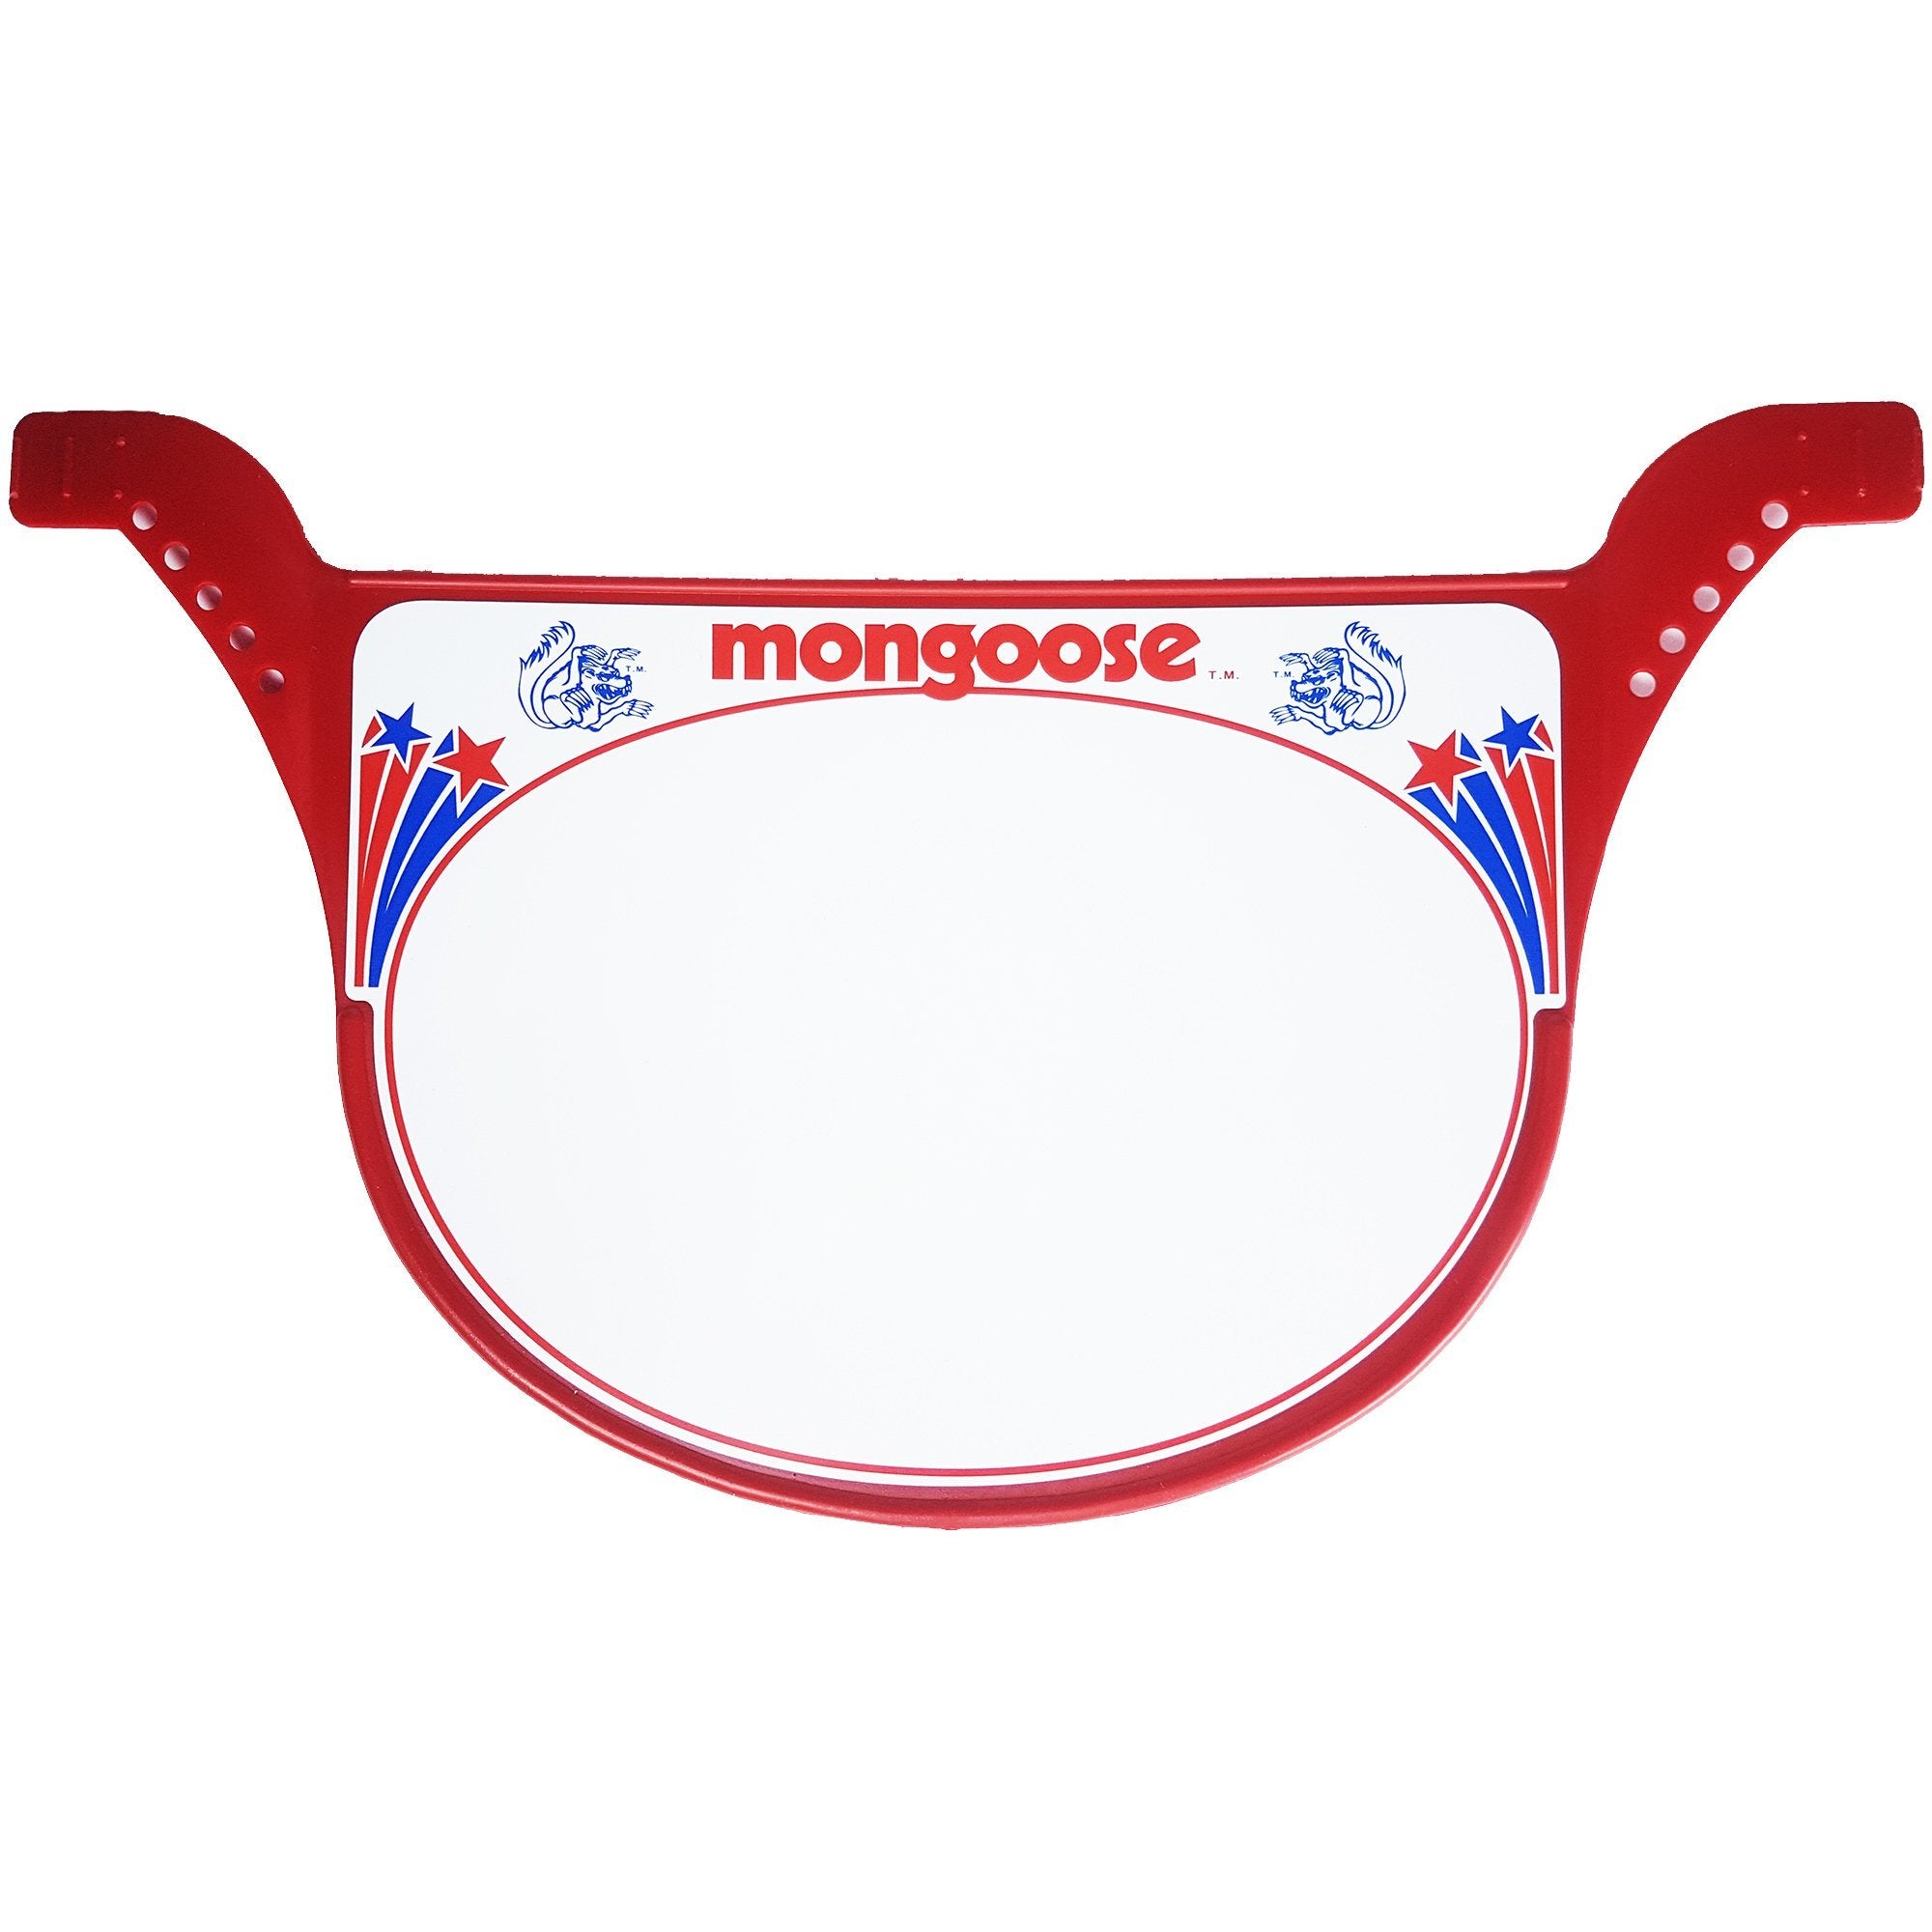 Mongoose Race Plate Red - Old School Bmx